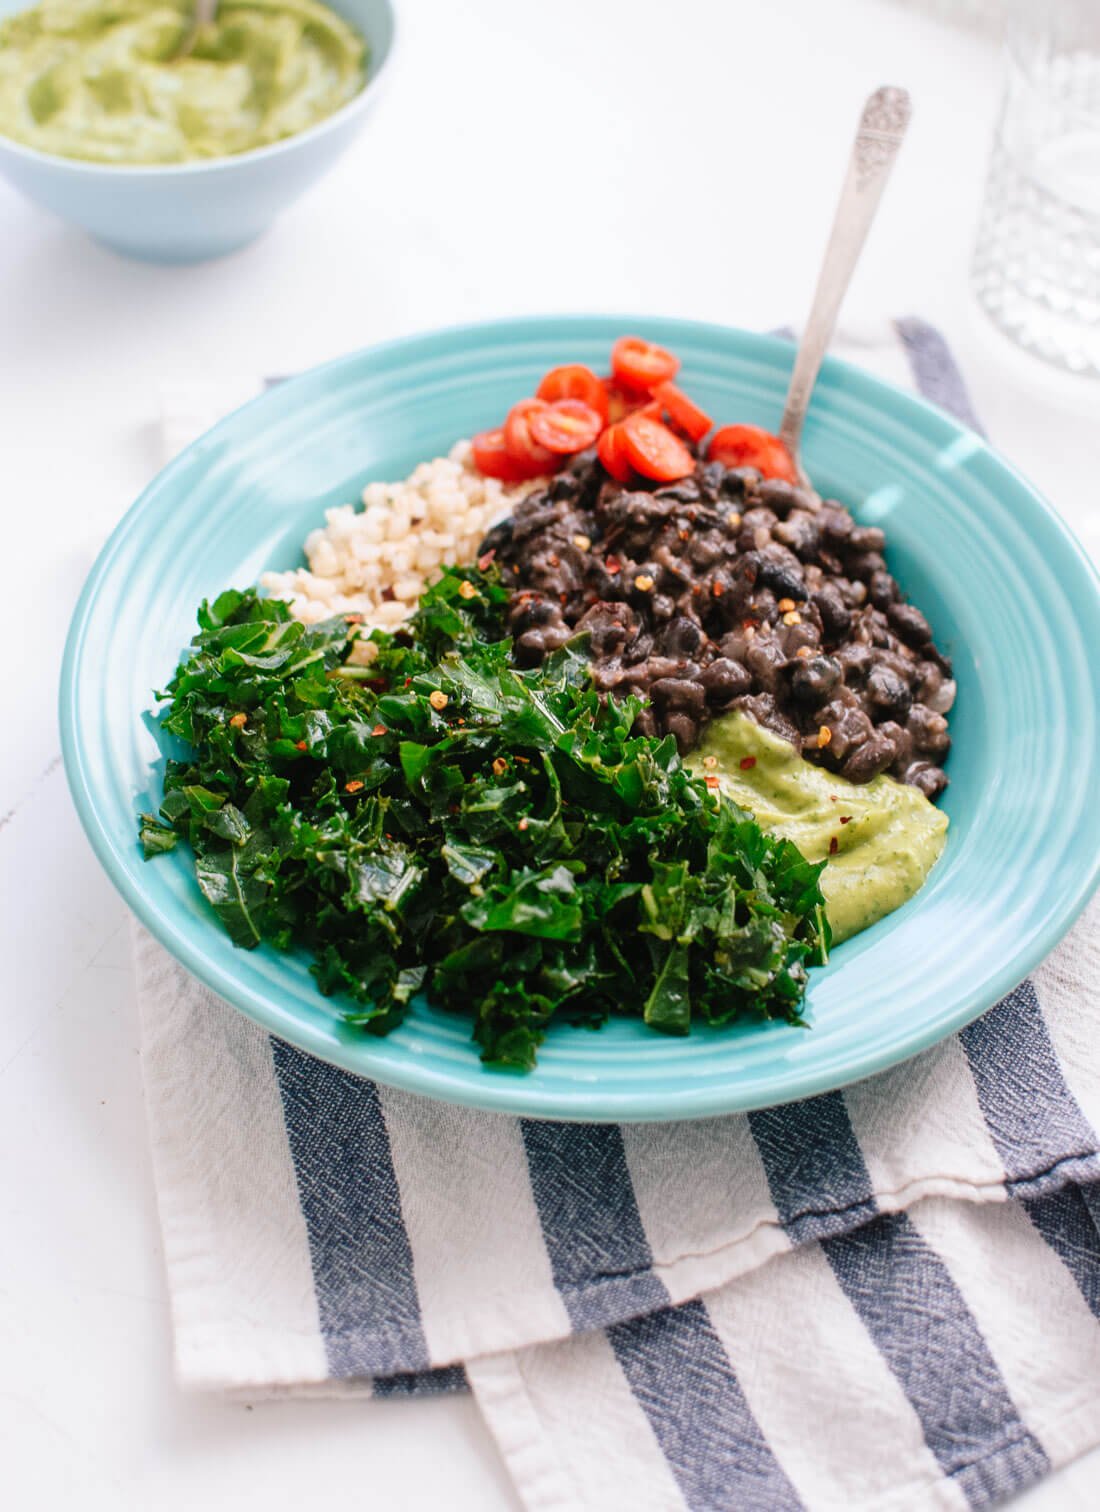 Kale black bean burrito bowls make for a delicious, redemptive, vegan dinner that packs well for tomorrow